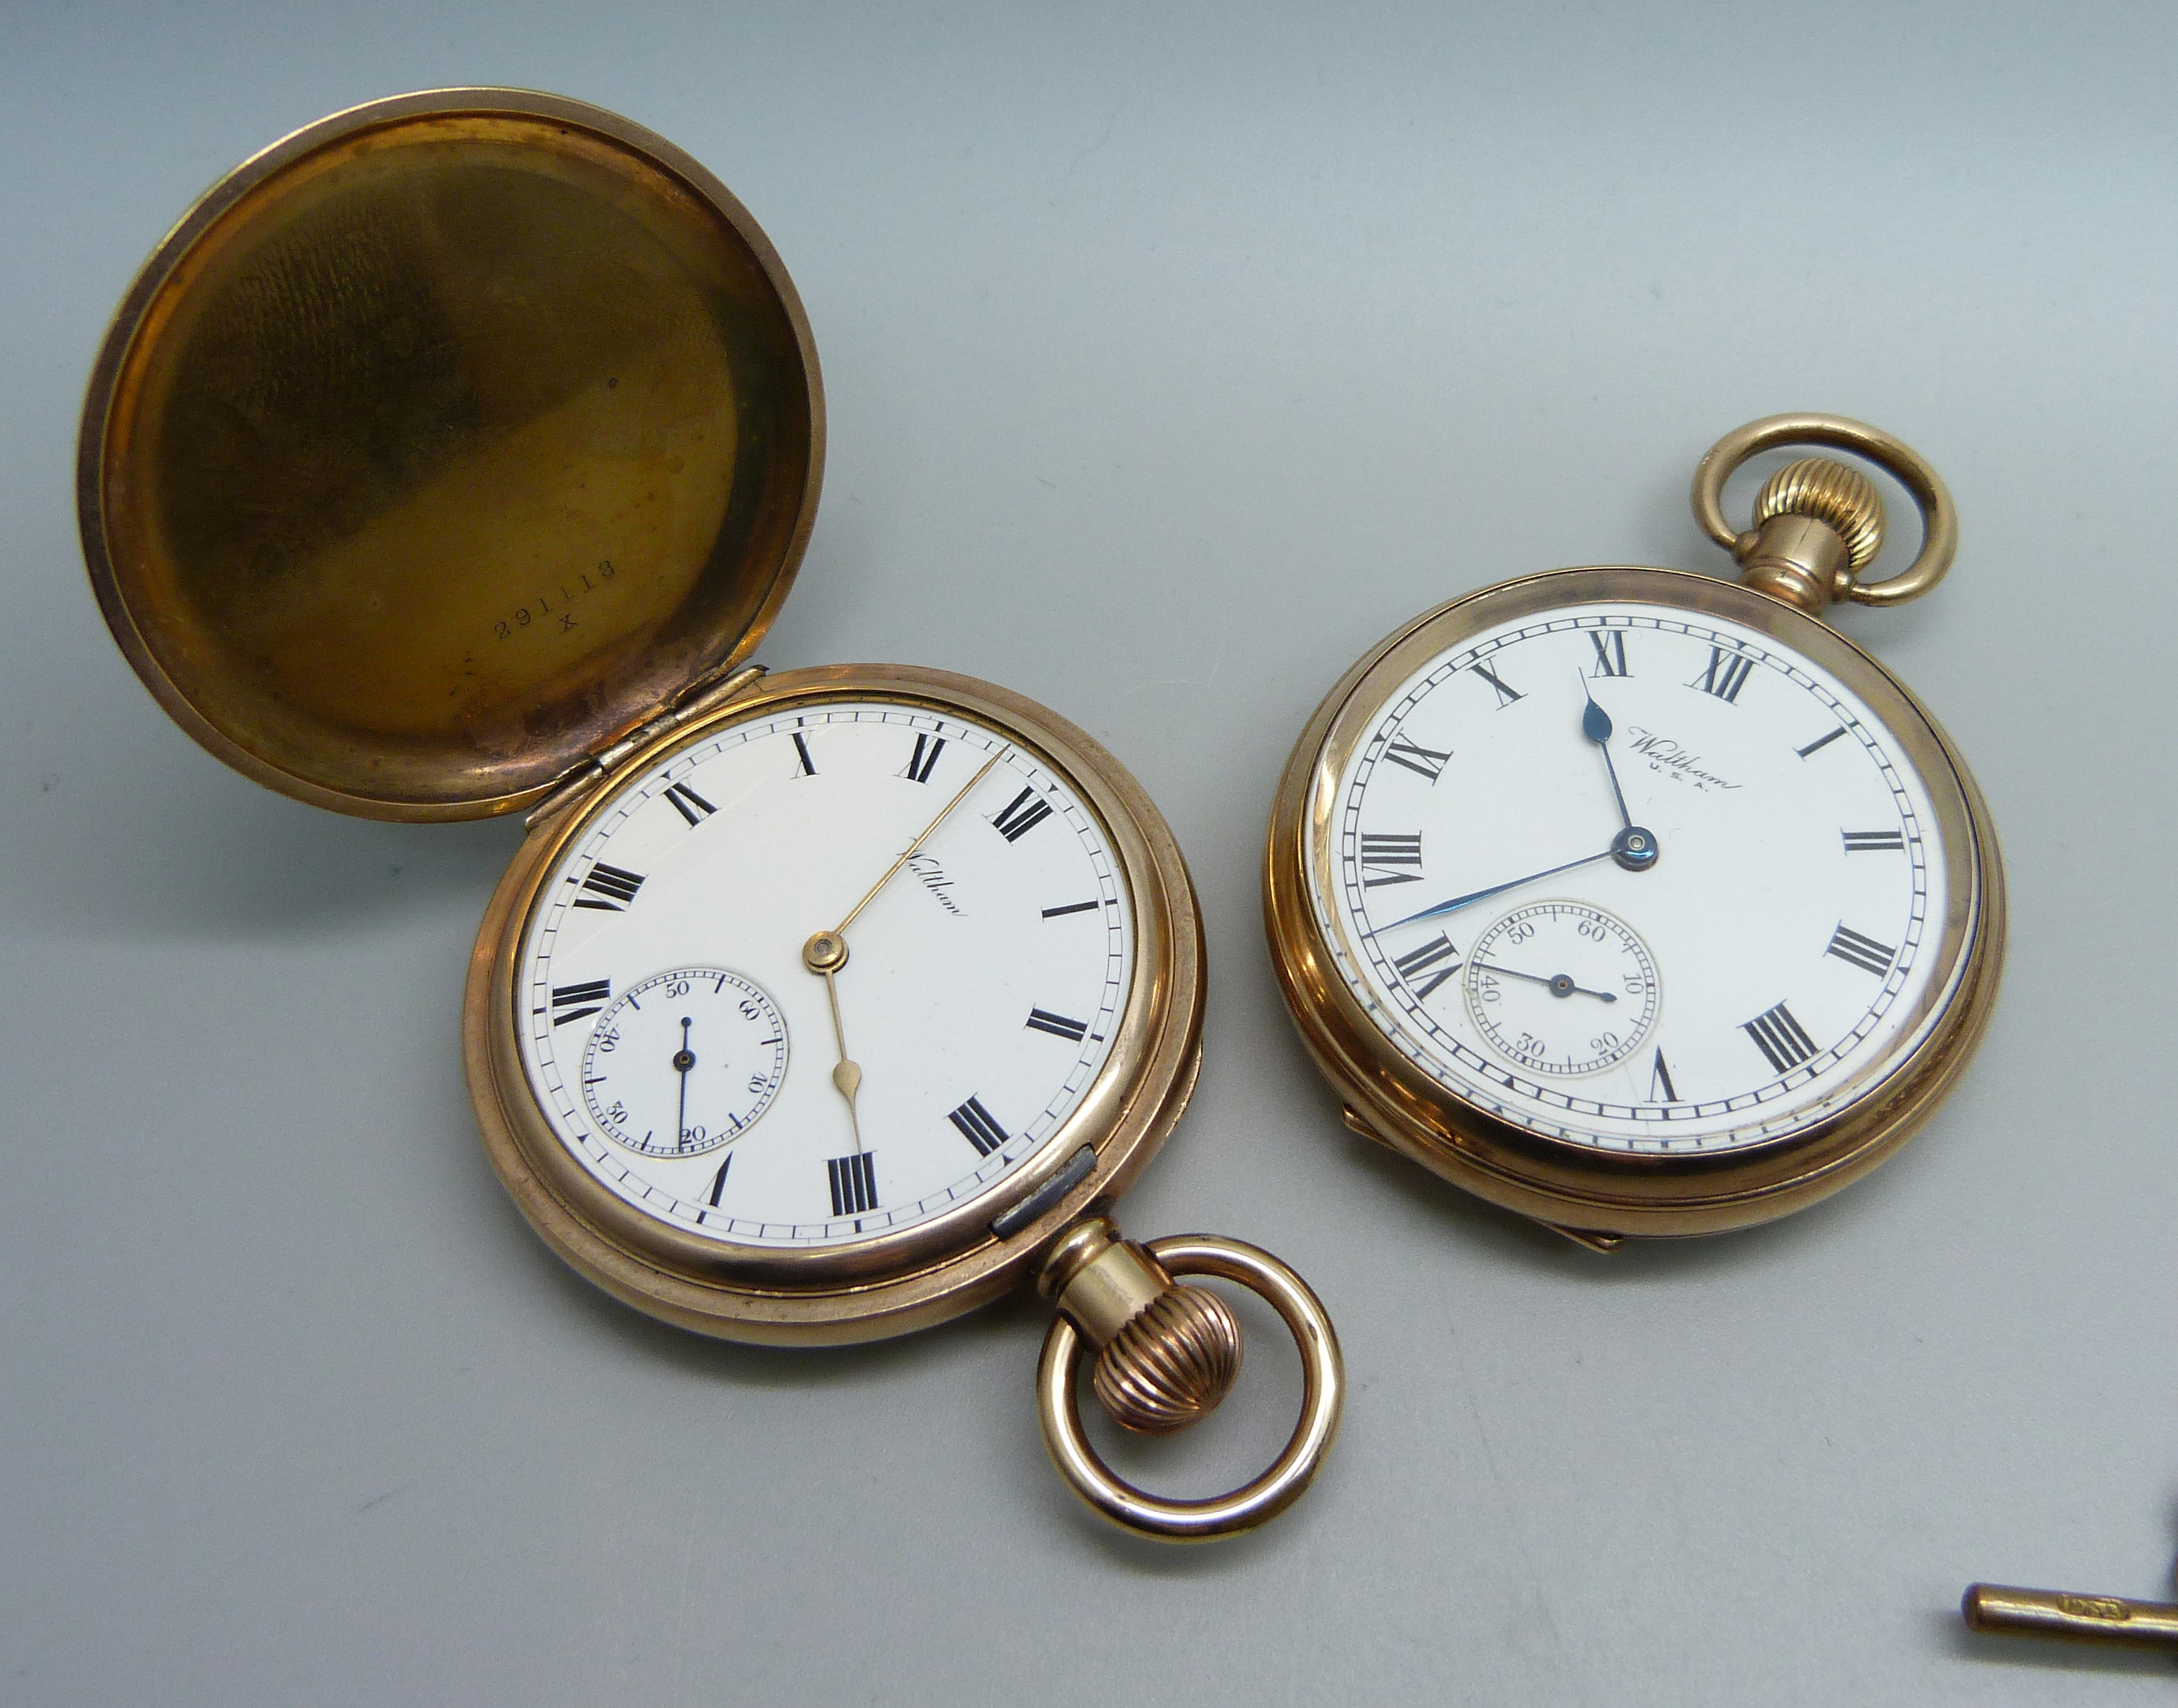 Two Waltham gold plated pocket watches both with 10 Year Star cases including a full hunter with - Image 4 of 6